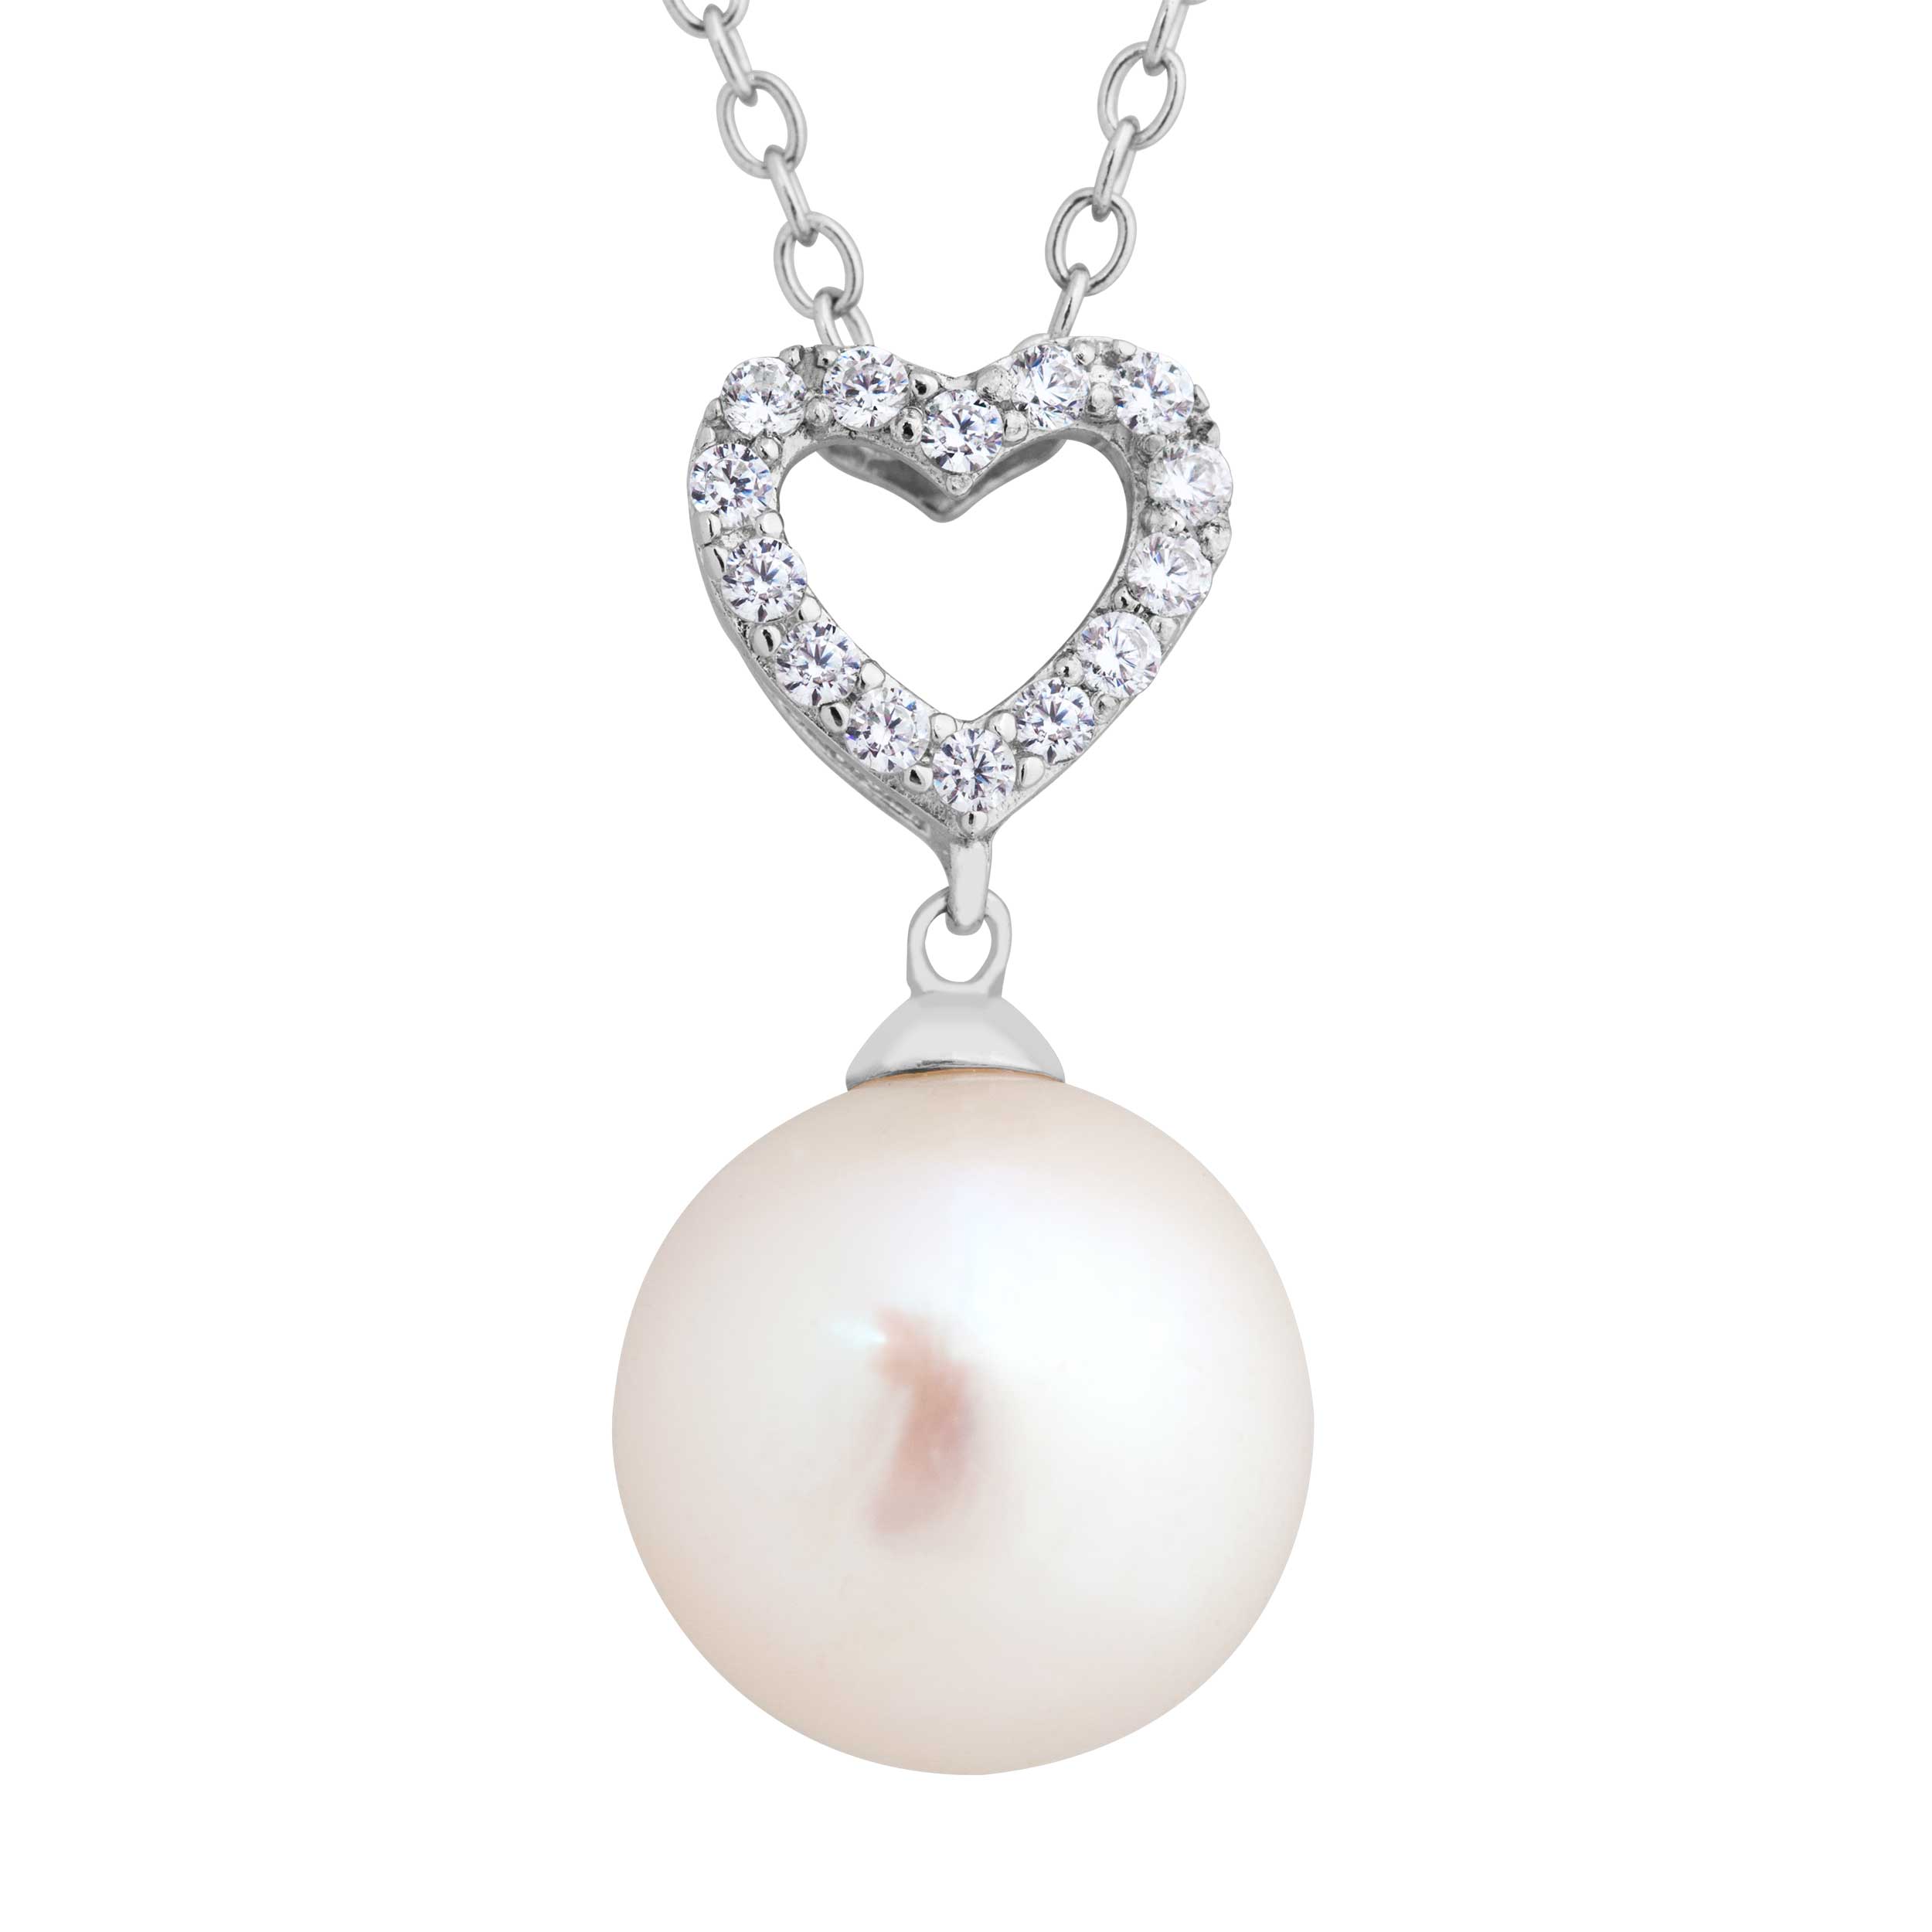 Lush Pearl  with Heart Pendant Necklace, Sterling Silver